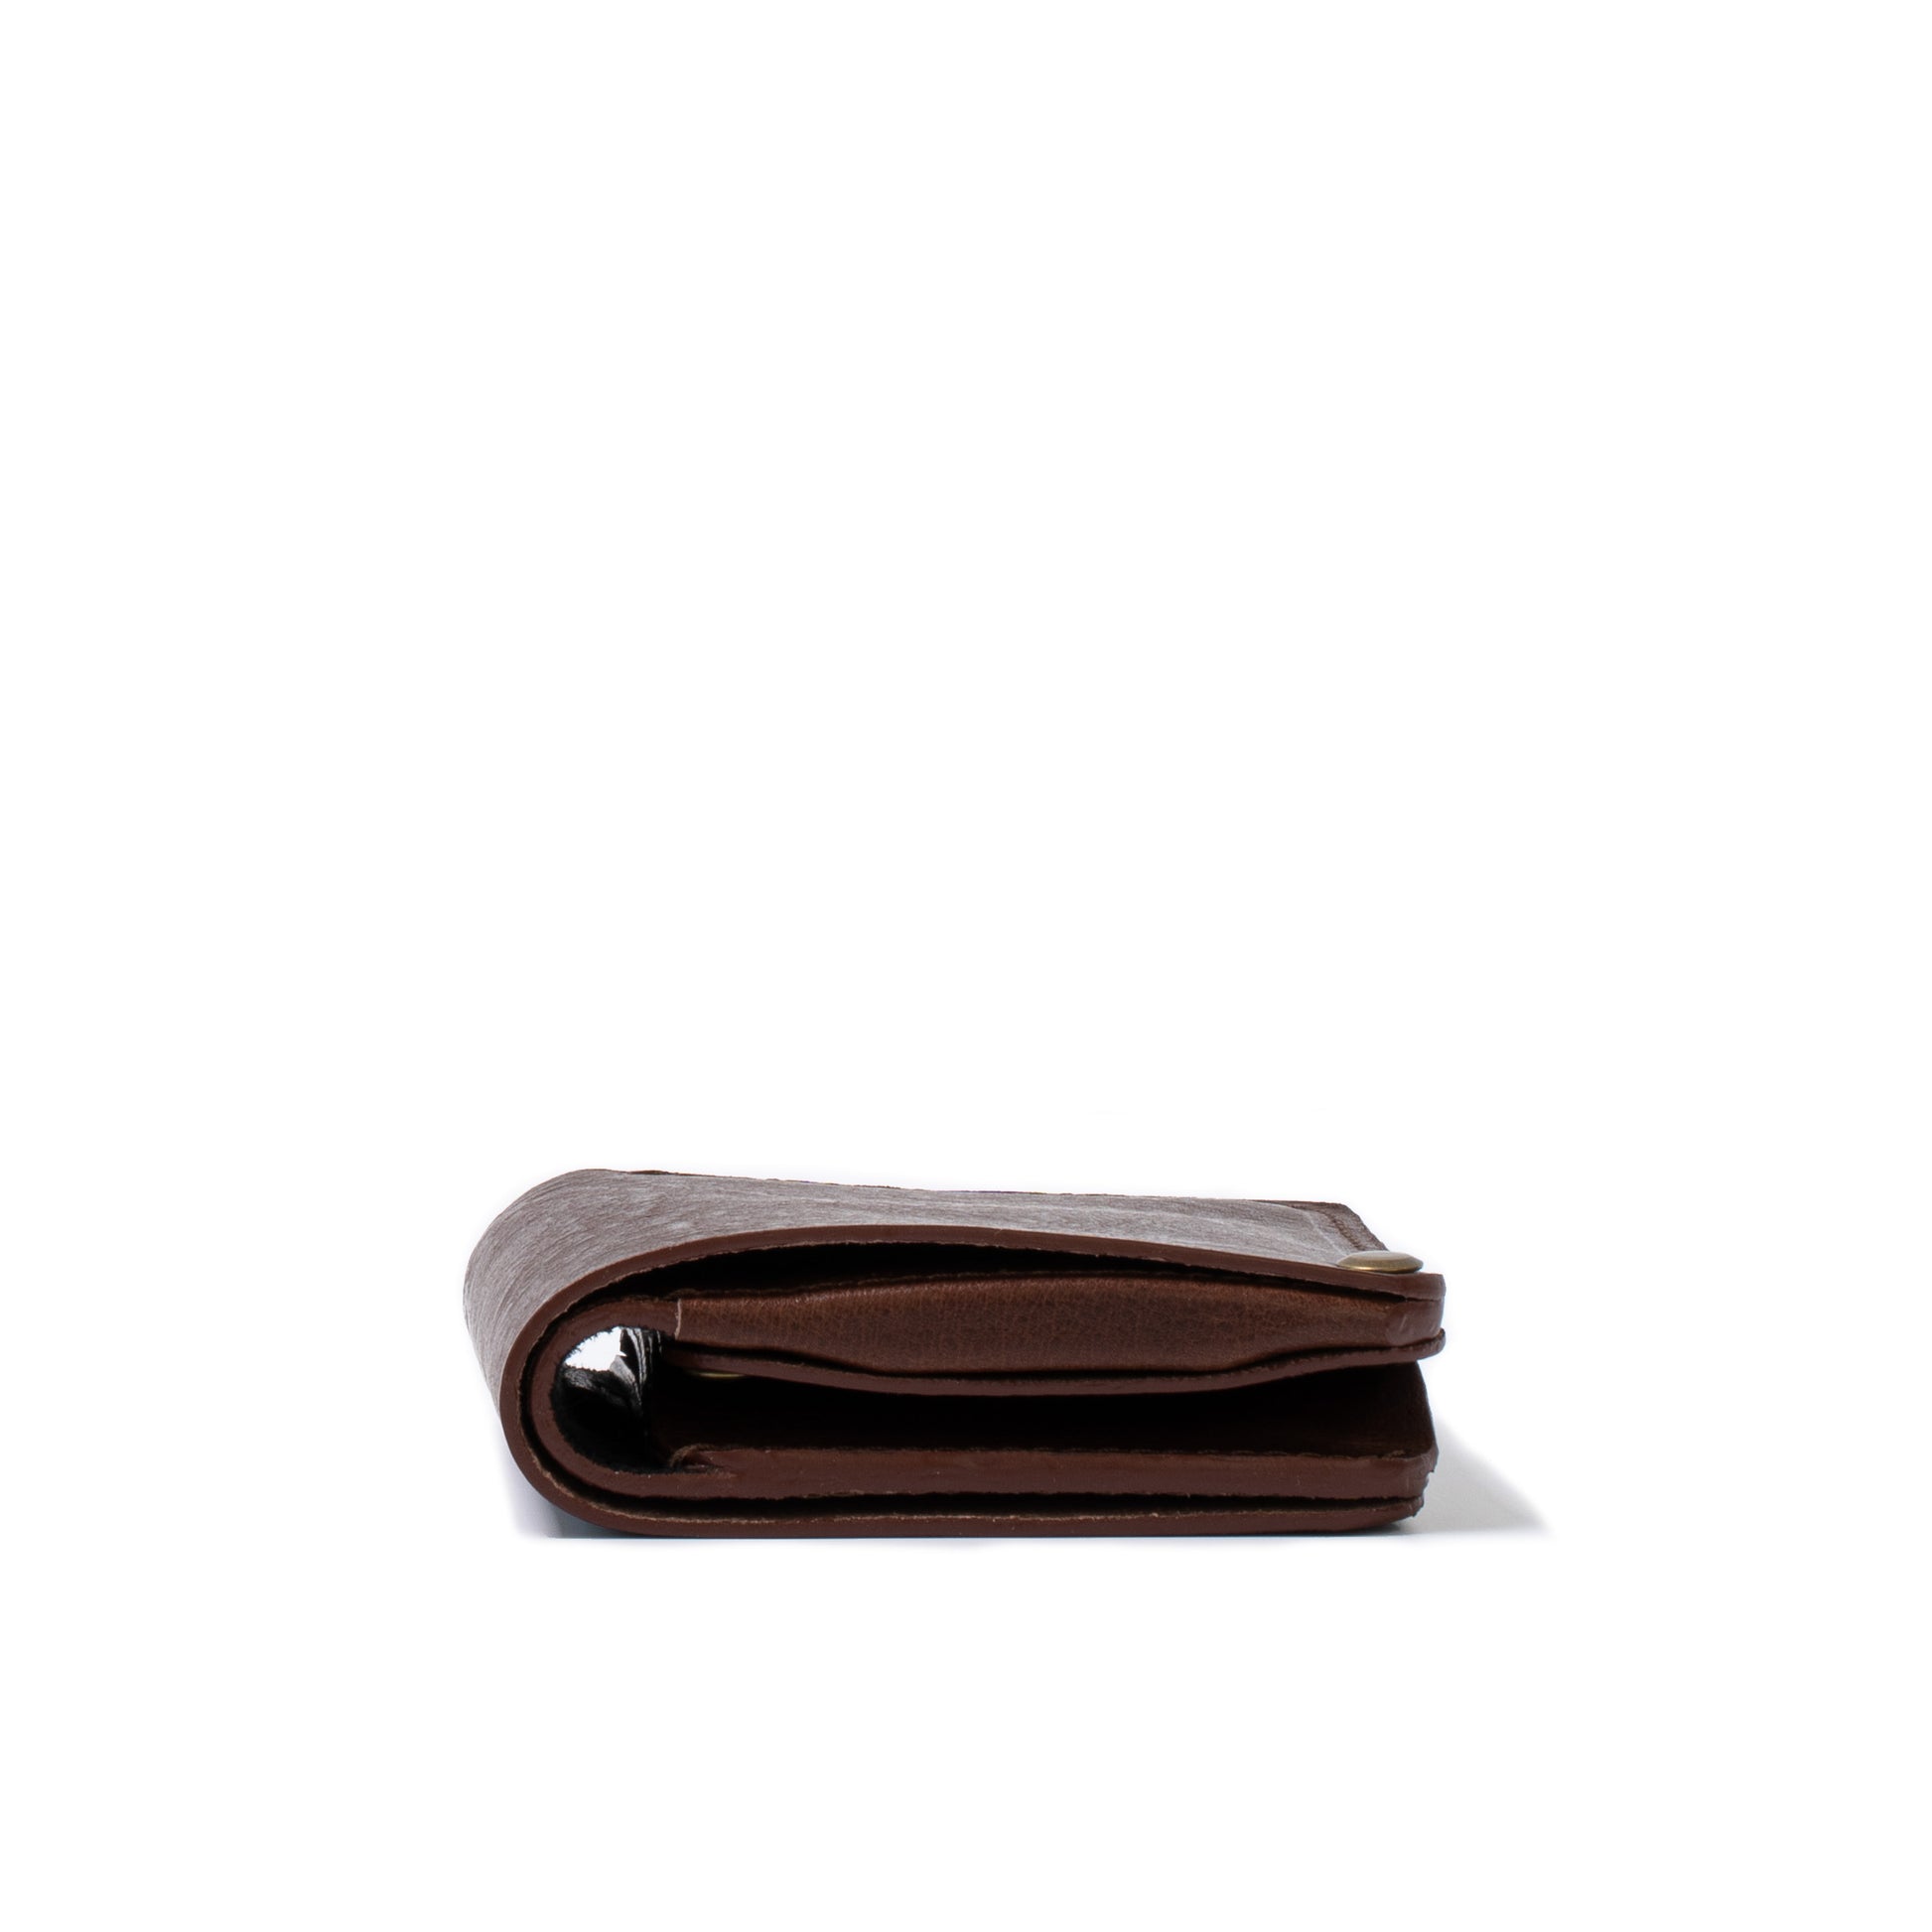 Premium AirTag wallet with large coin punch for men and women made by Geometric Goods from superior Italian Leather in dark brown color